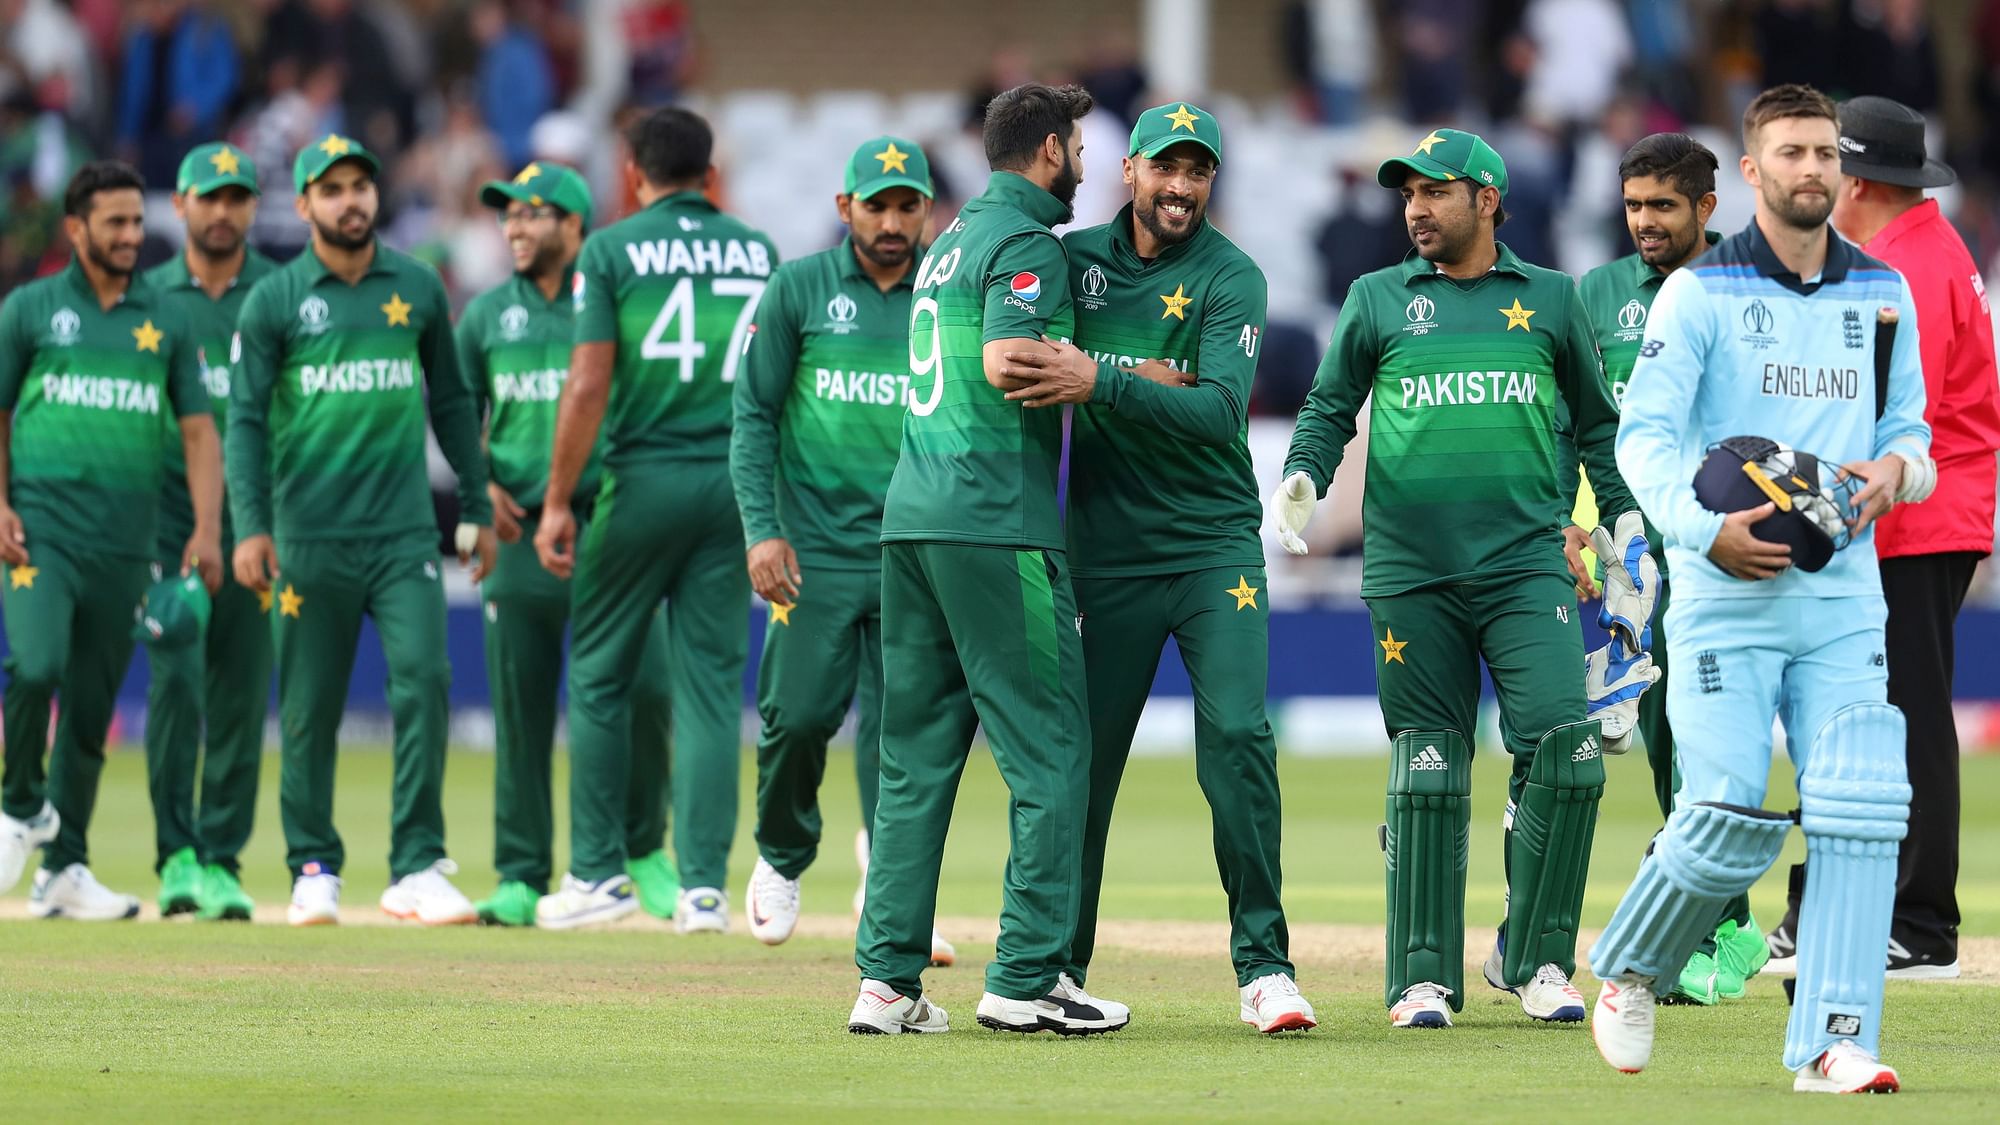 Pakistan players congratulate each other after their win over England in the Cricket World Cup match at Trent Bridge in Nottingham, Monday, June 3, 2019.&nbsp;